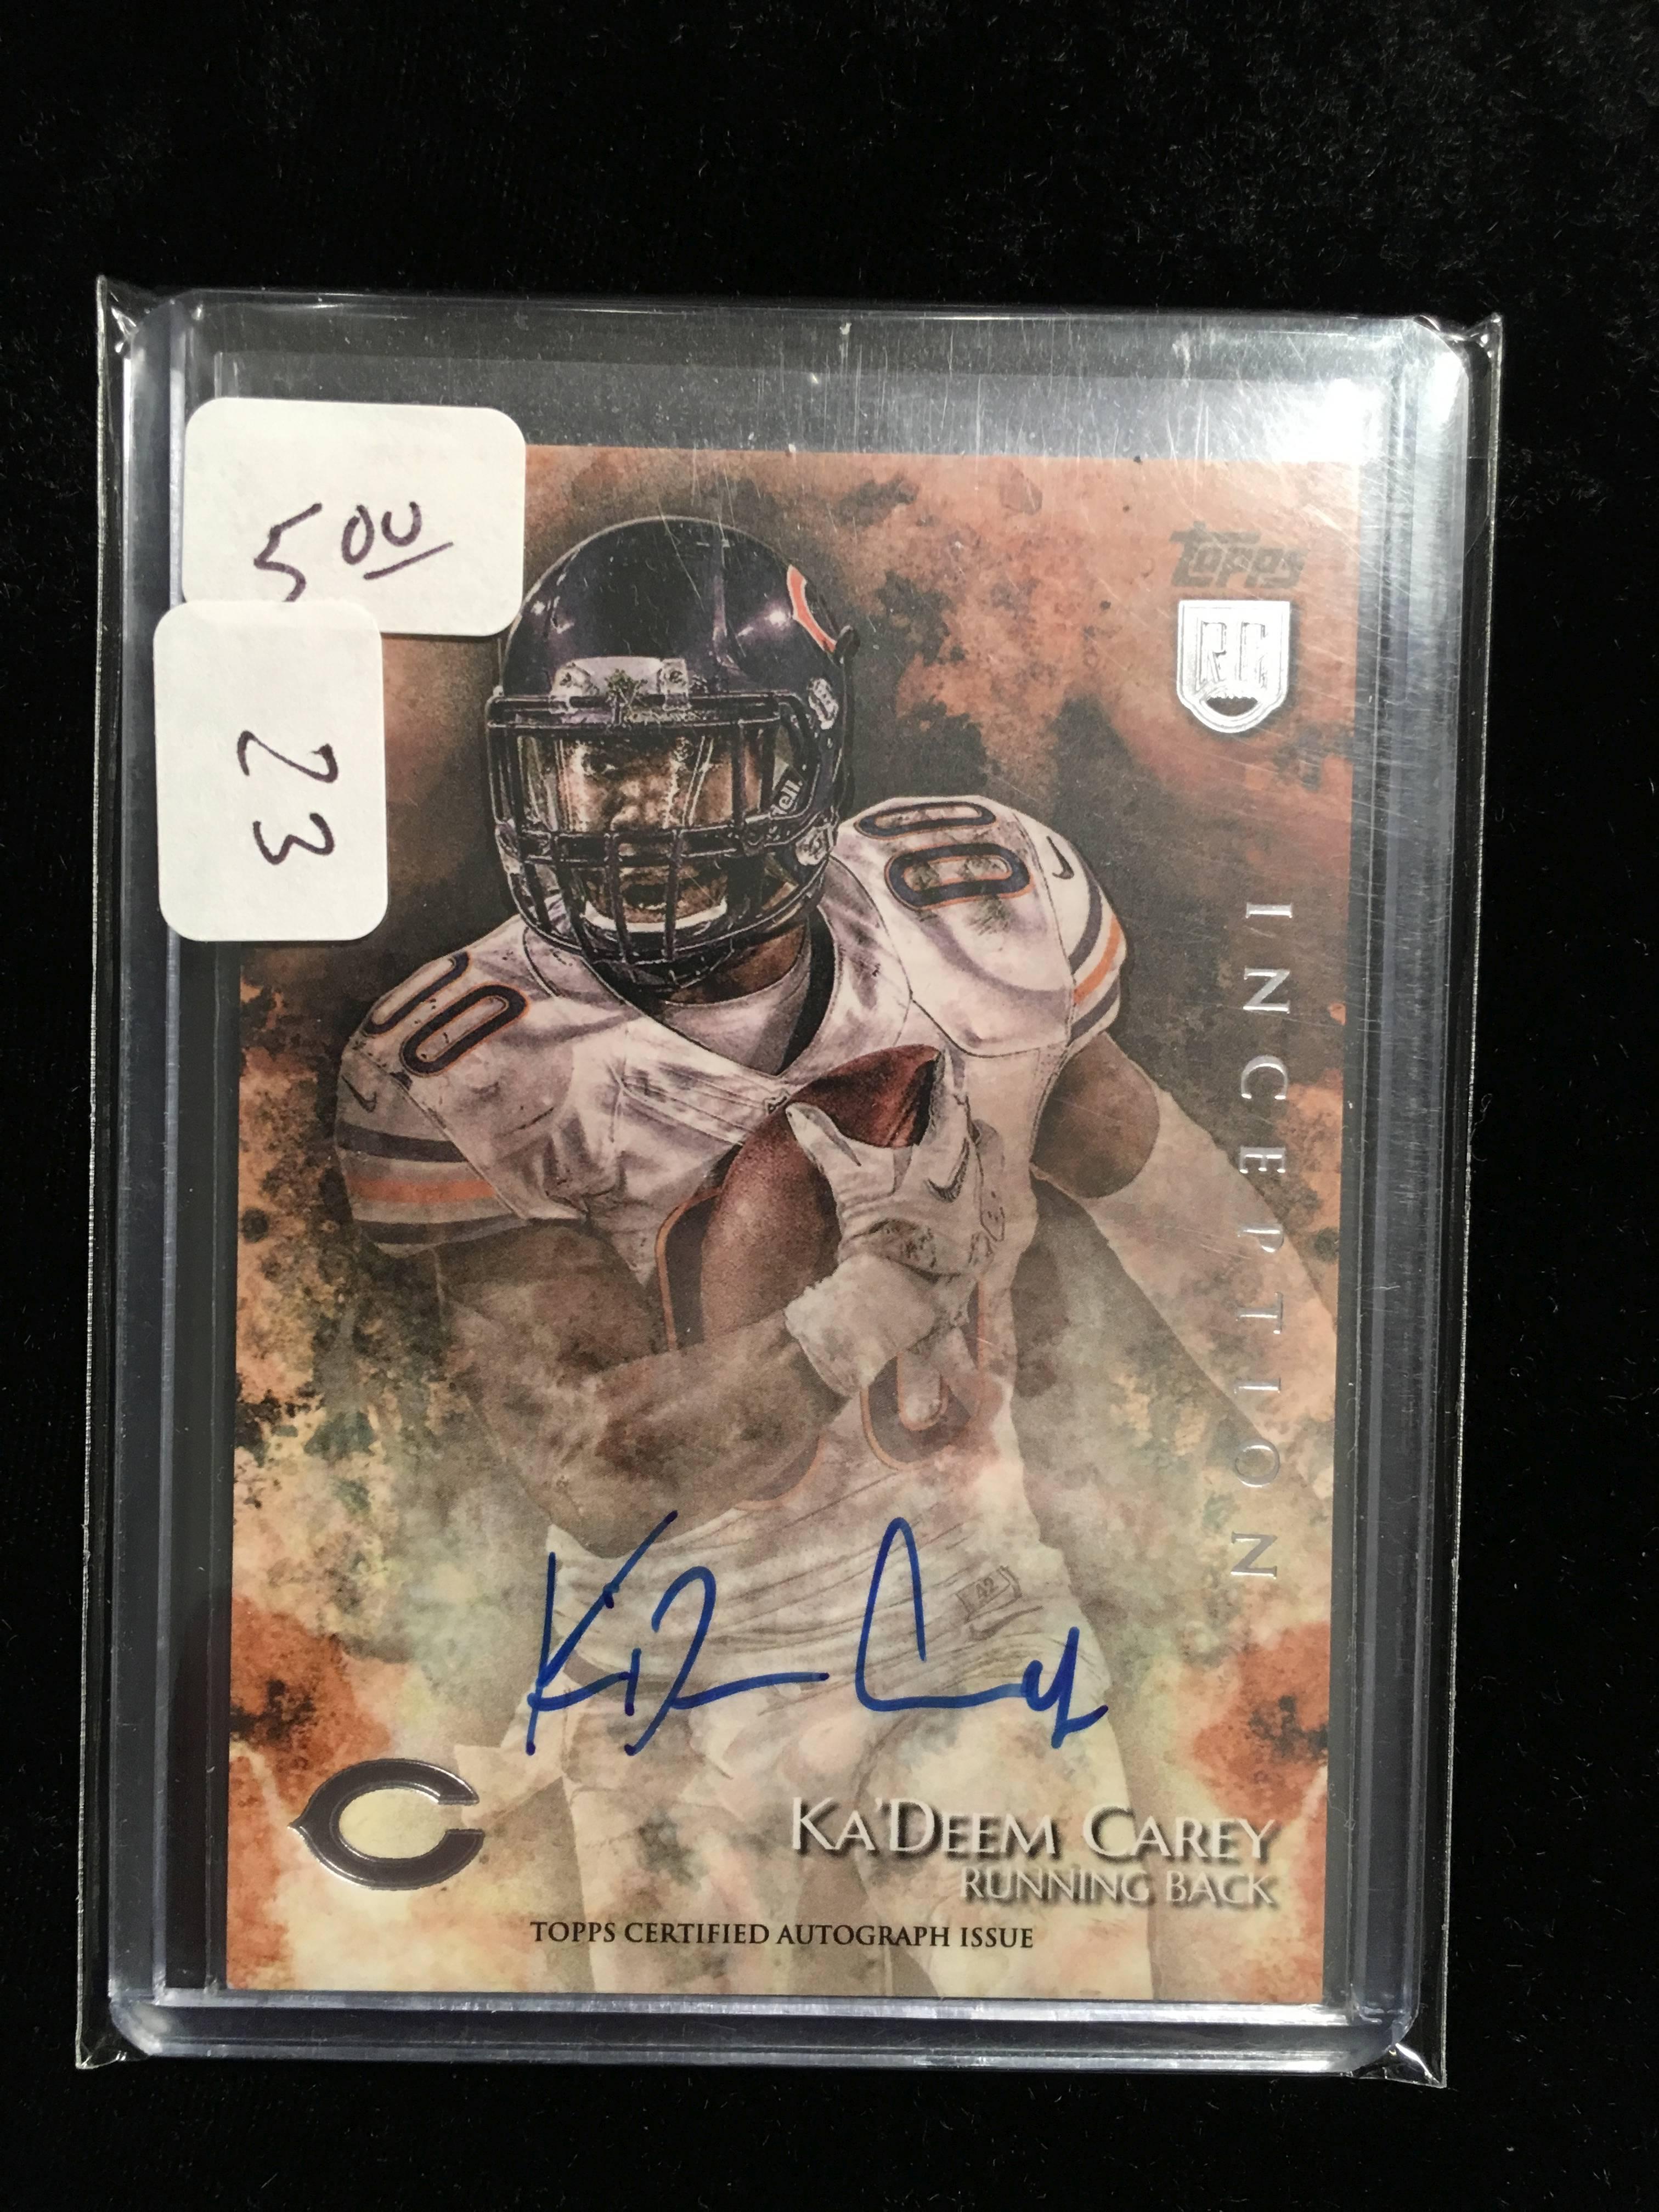 Topps Nfl Football Autographed Card